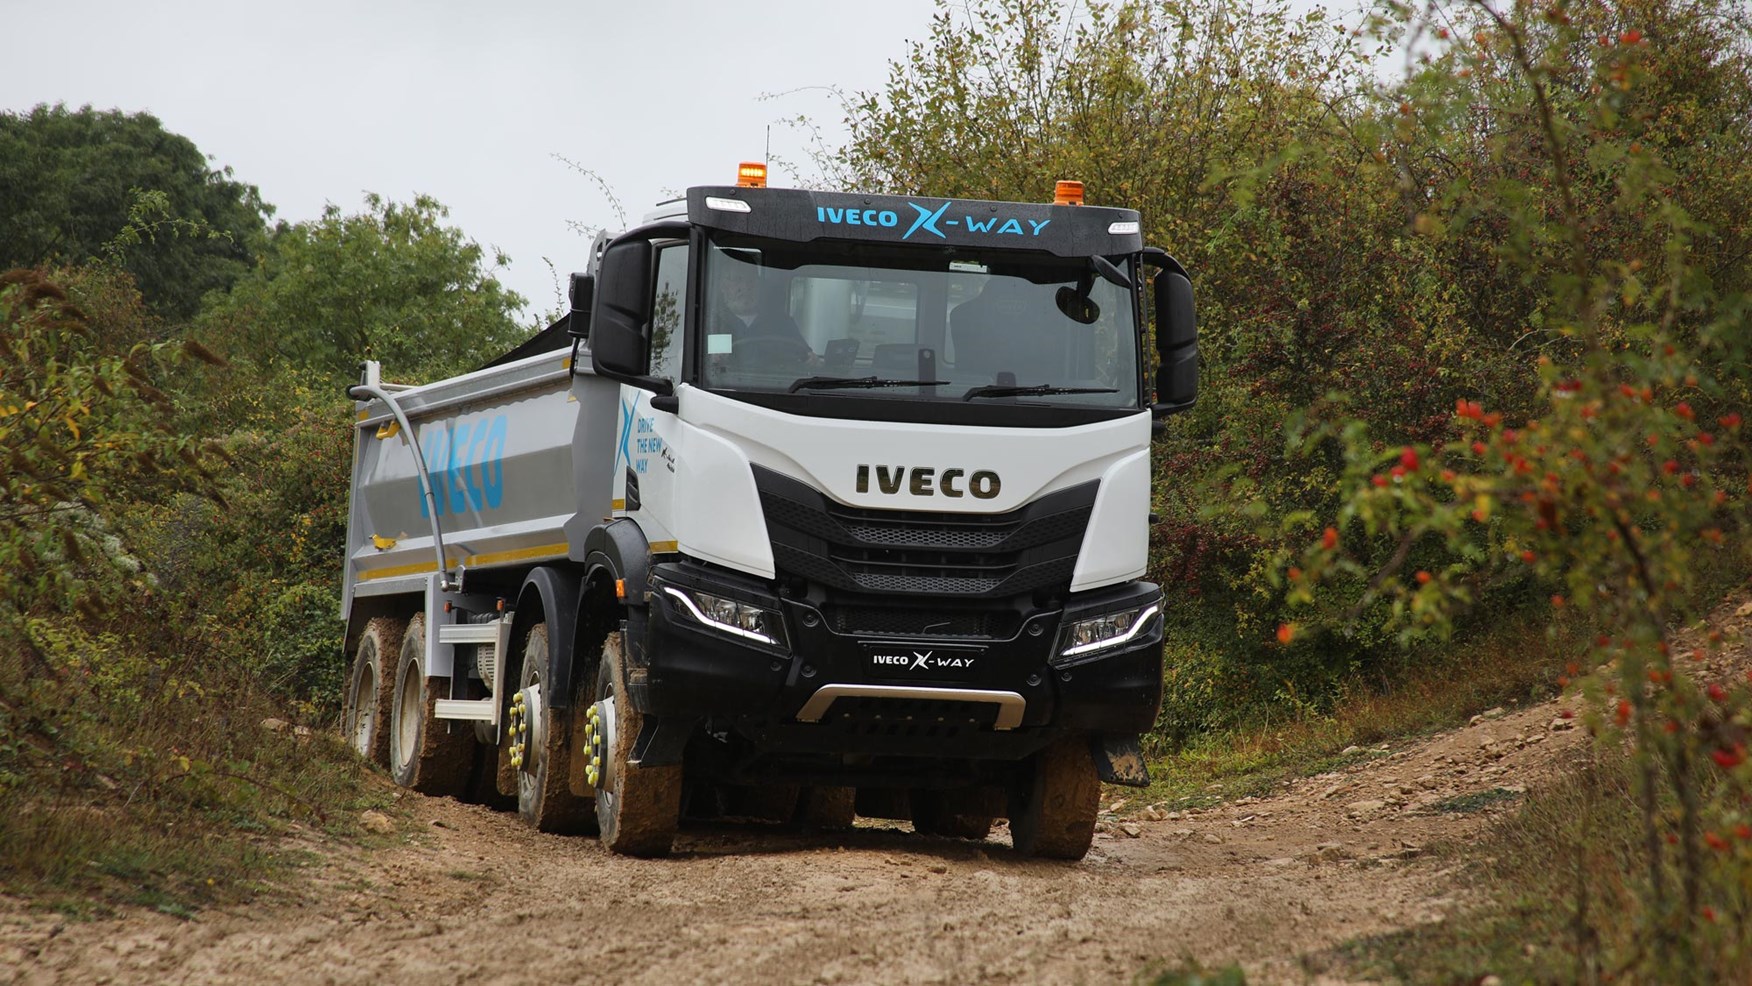 Iveco Archives - SMMT